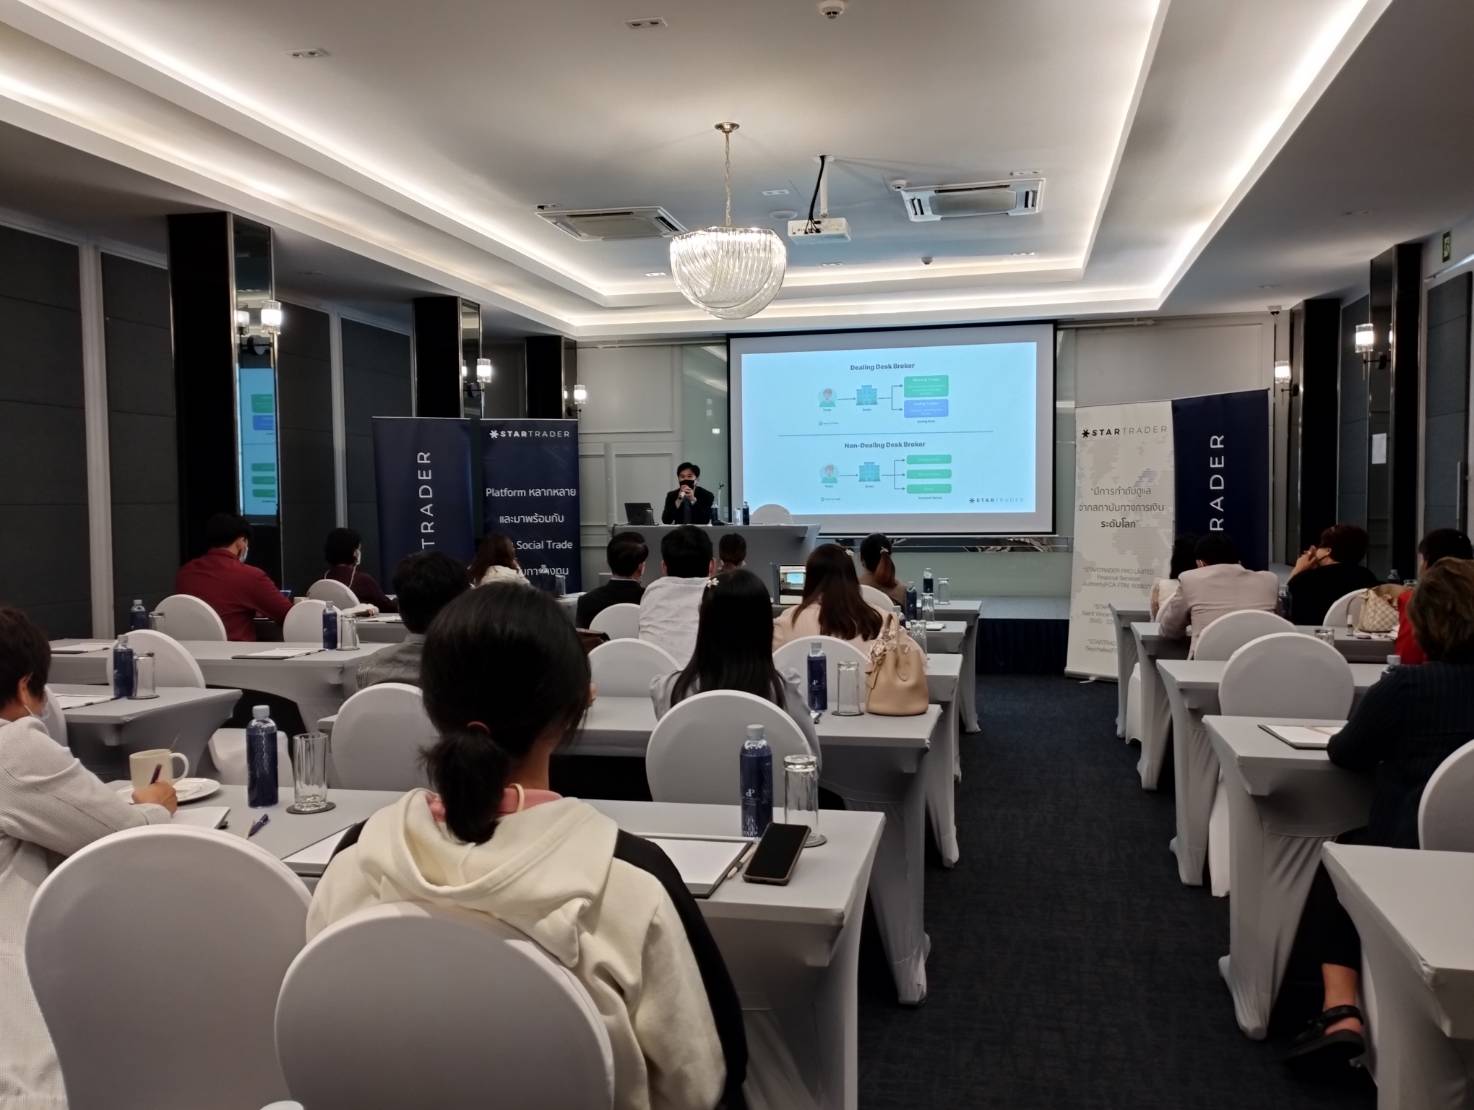 STARTRADER Thailand team held a seminar last August 20, 2022 discussing how to earn from global financial markets.